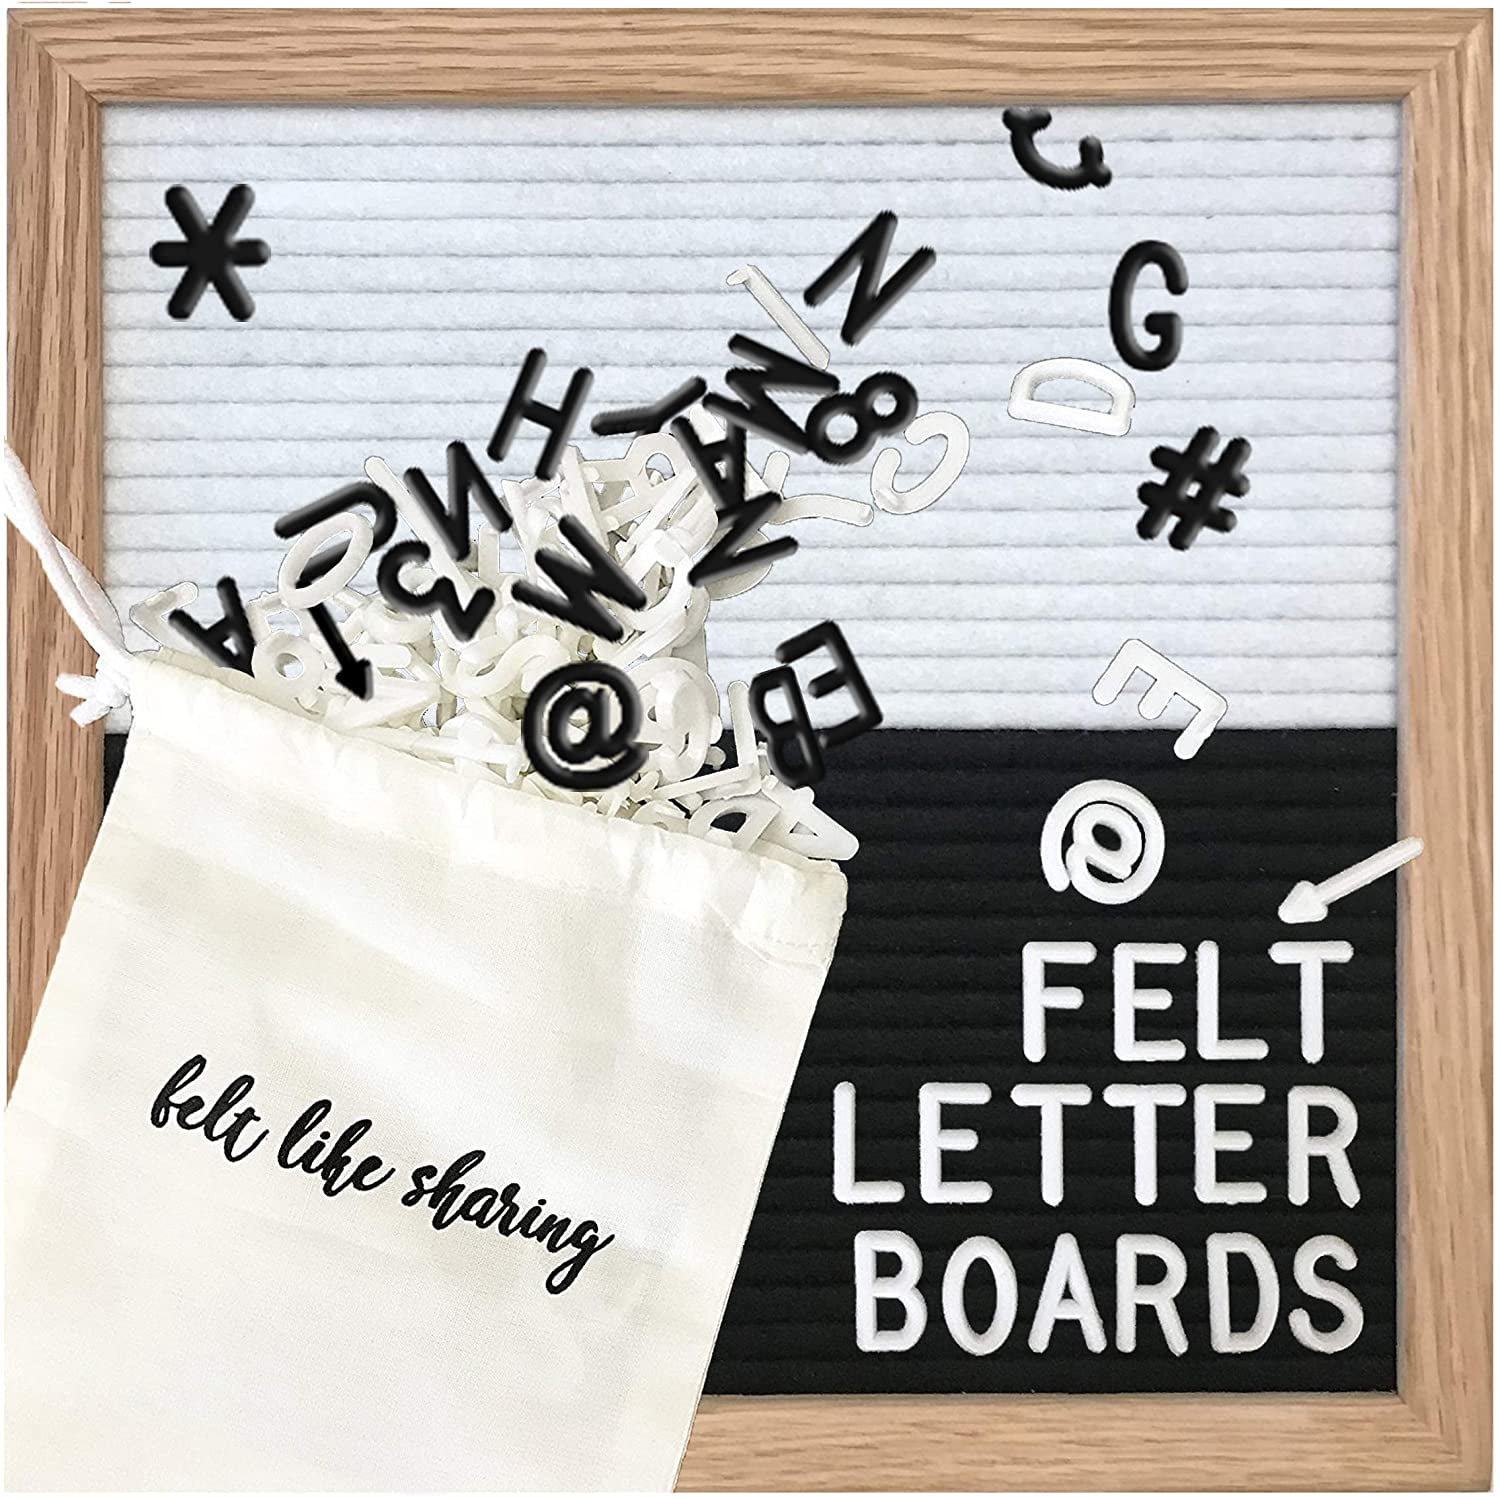 MeCids Felt Letter Board Sign Message Board Baby Announcement Sign Boards with Letters Home Decor Changeable Letter Board 